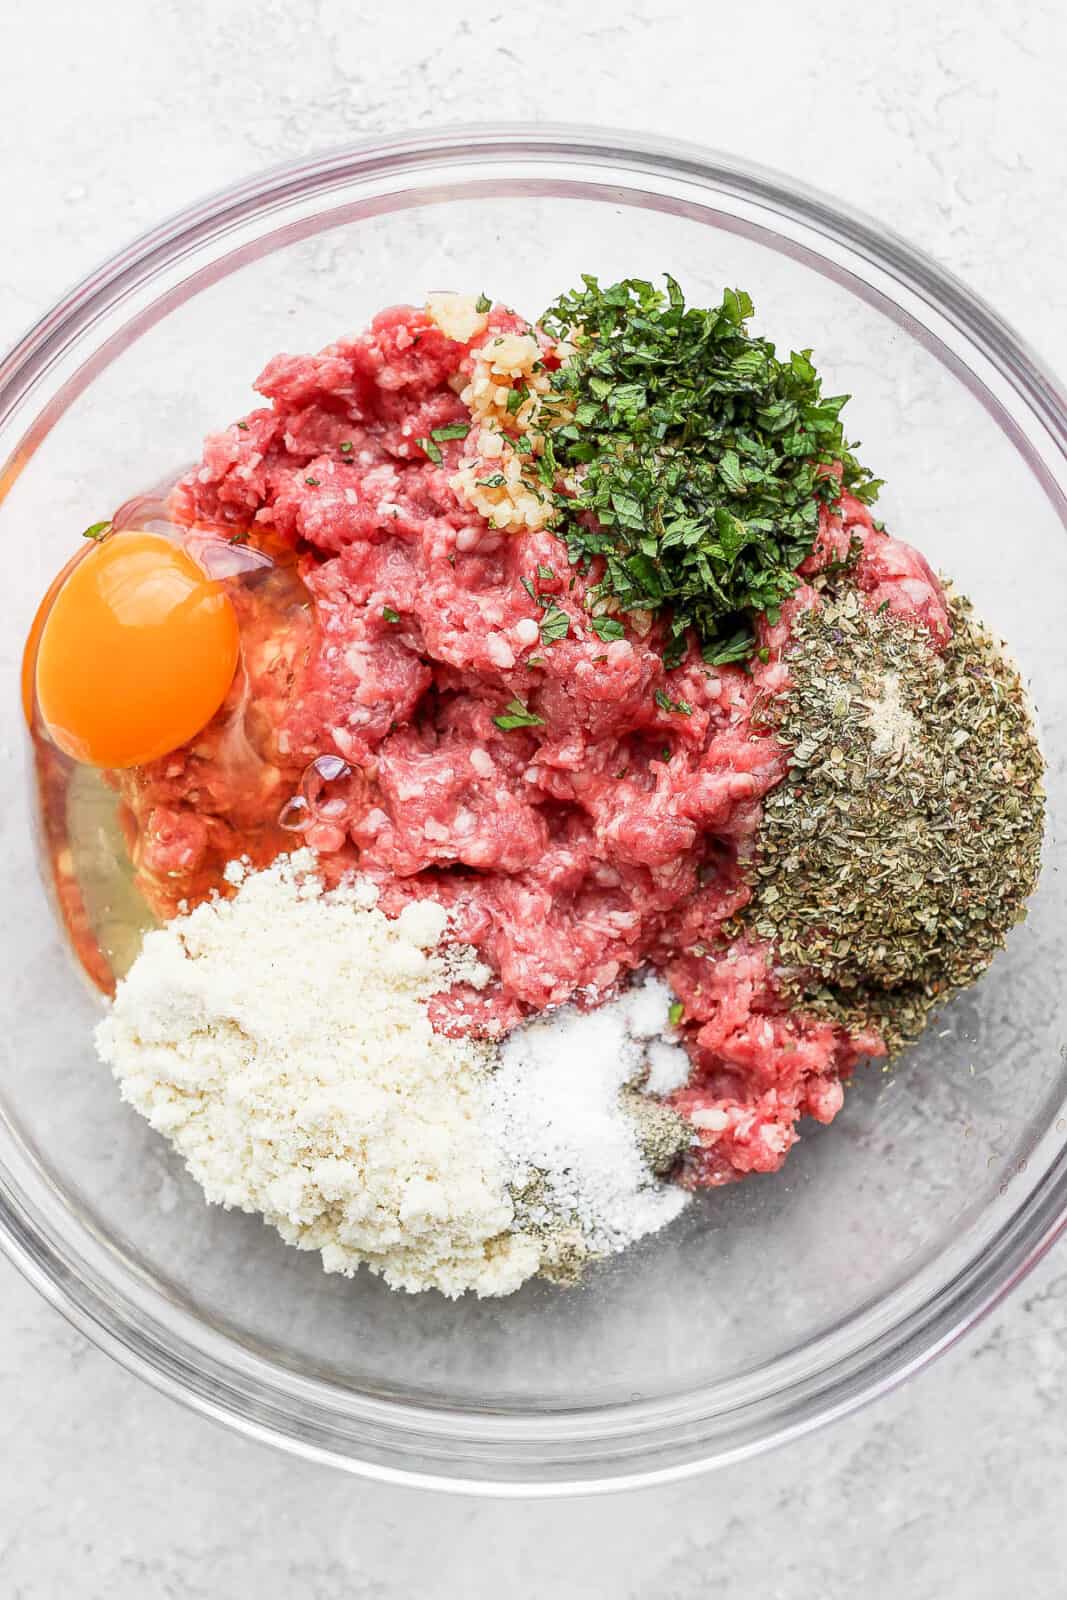 All the lamb burger ingredients in a mixing bowl.